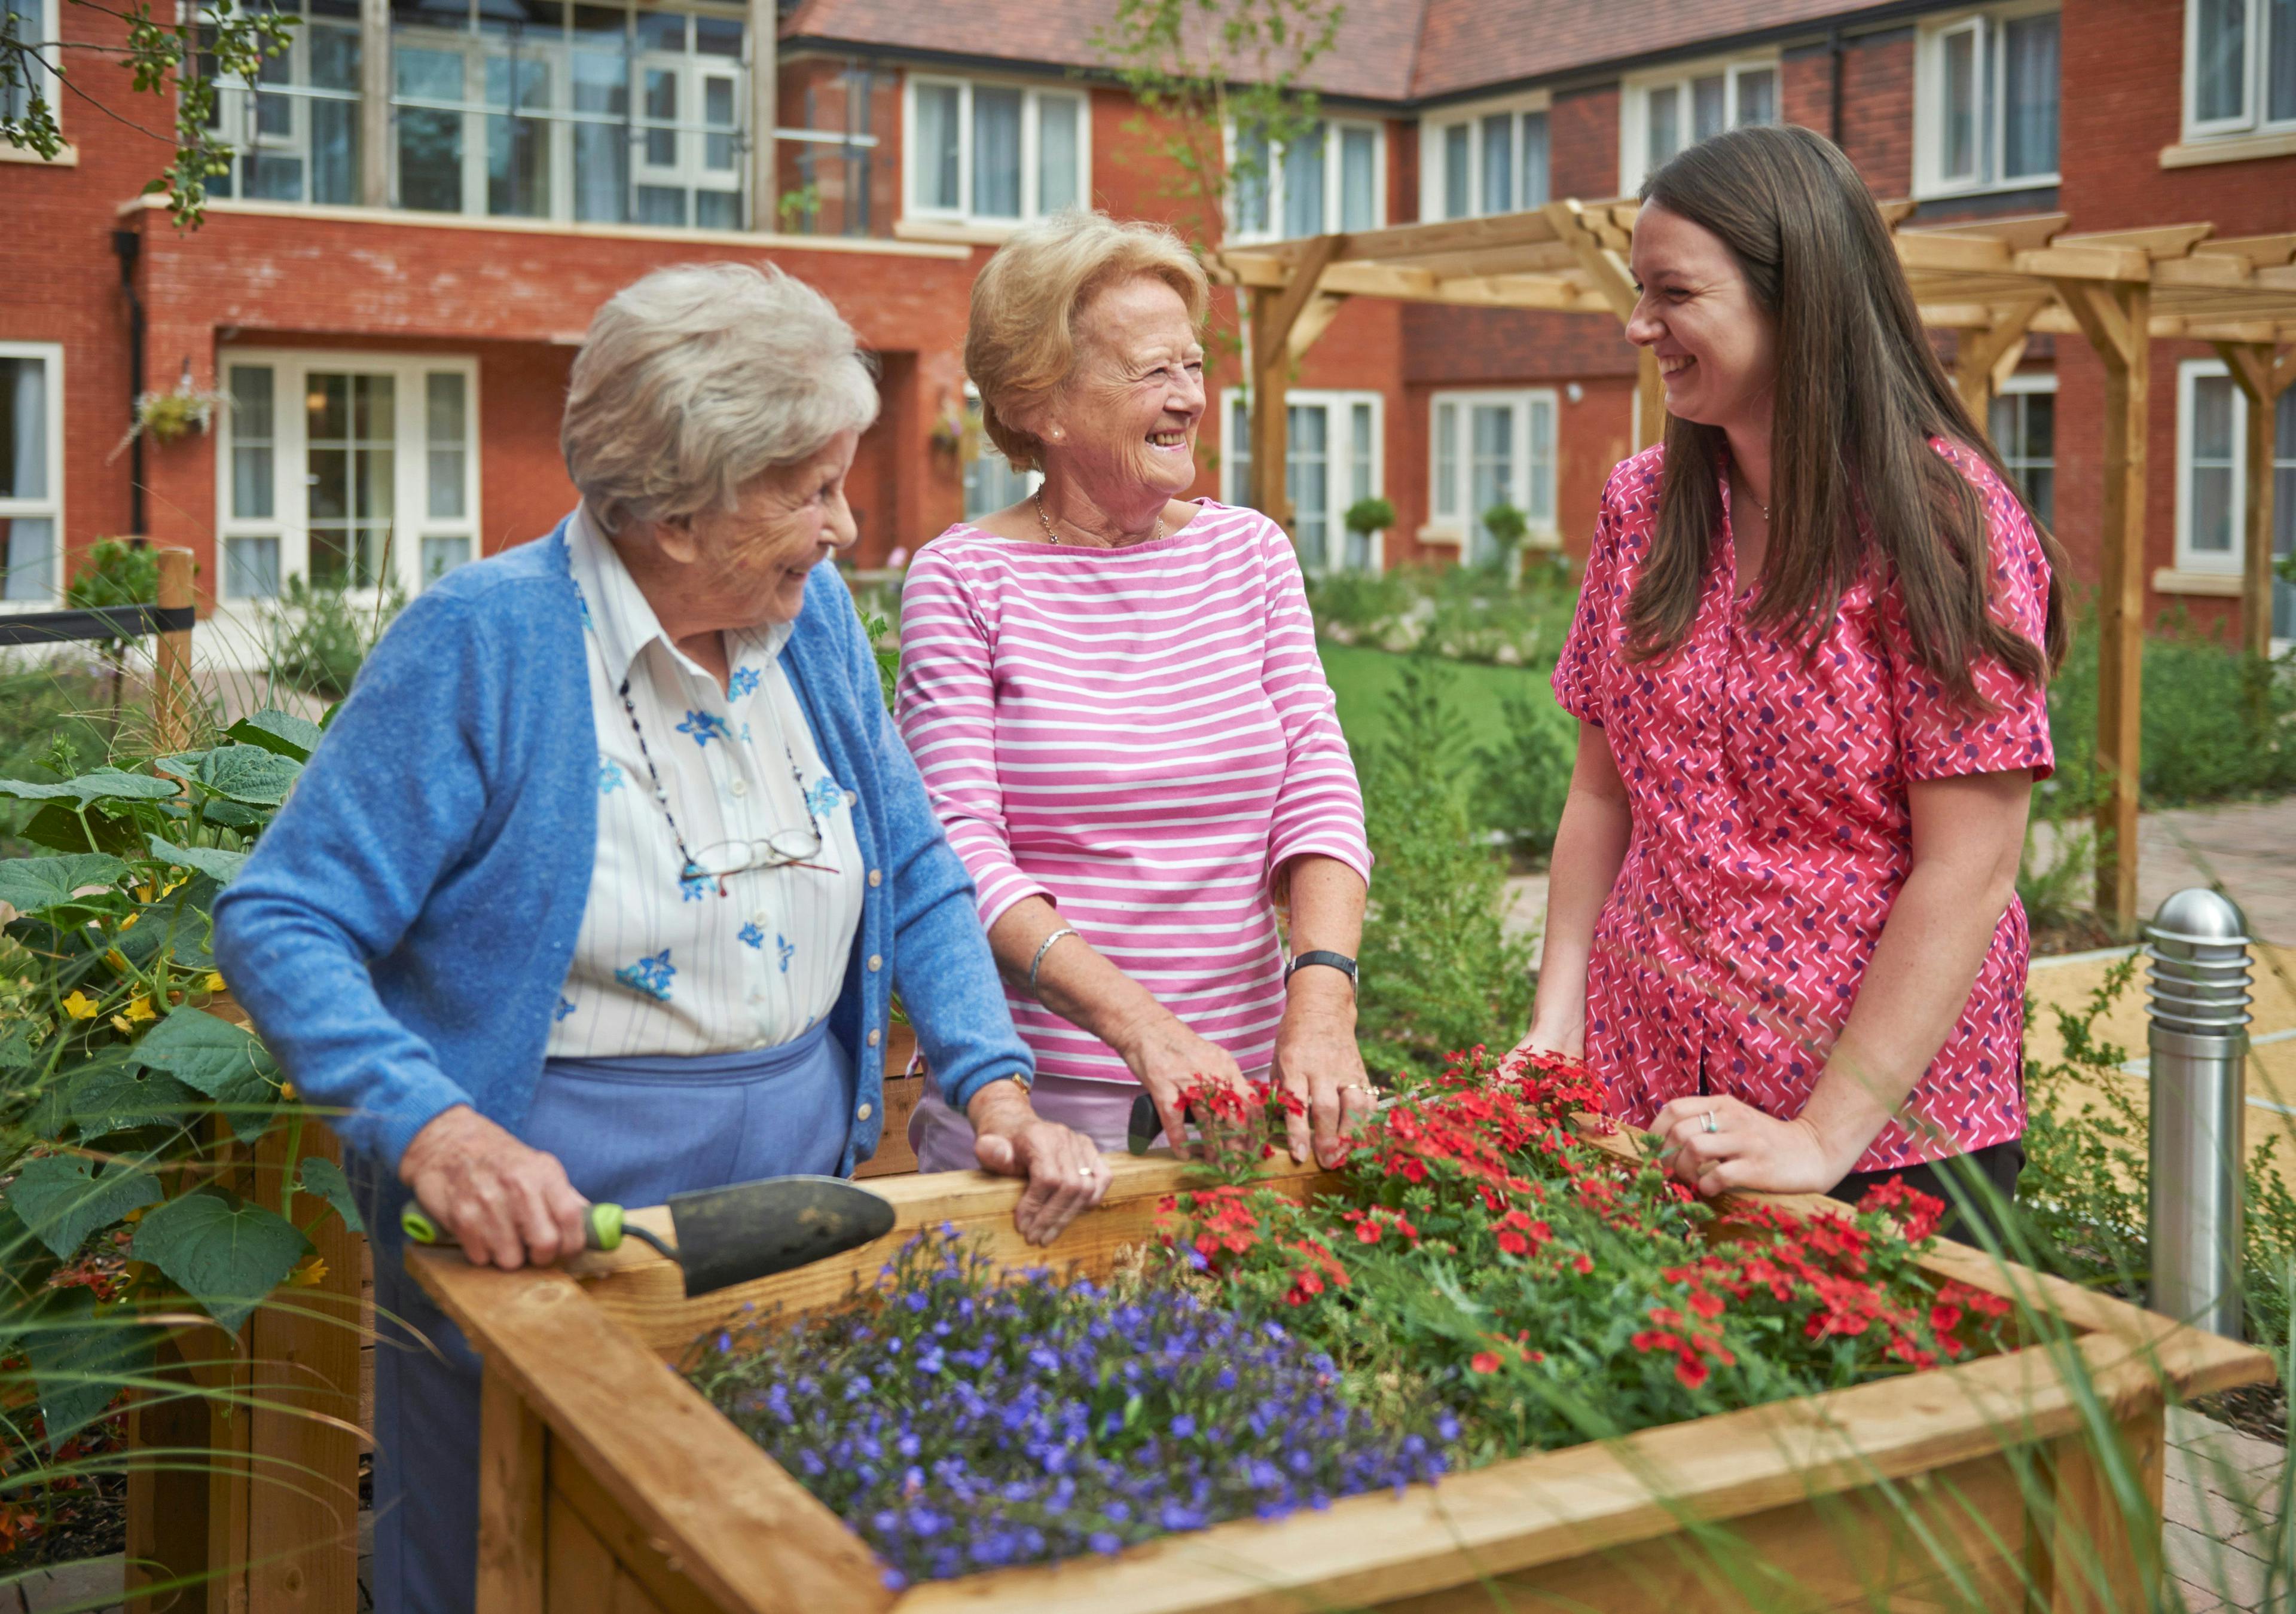 Porthaven Care Homes - Barley Manor care home 009